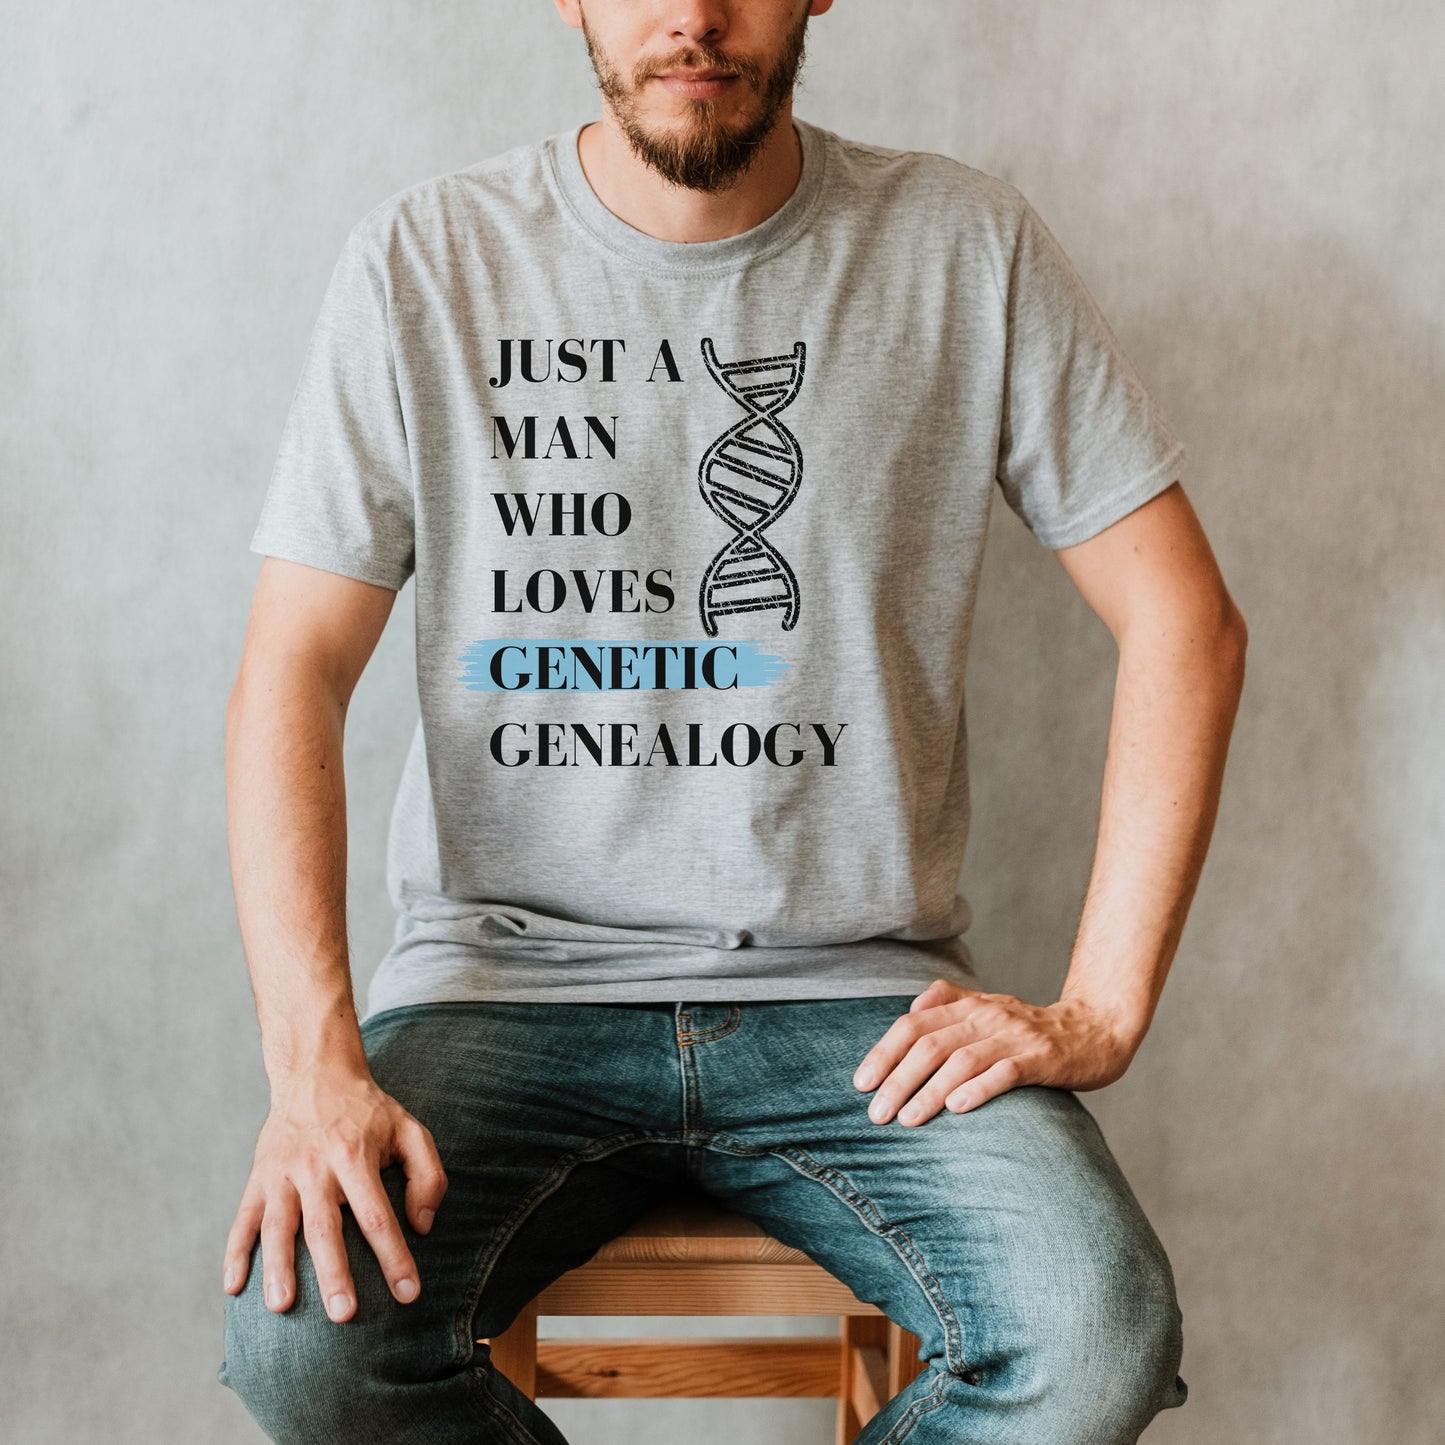 Just A Man Who Loves Genetic Genealogy